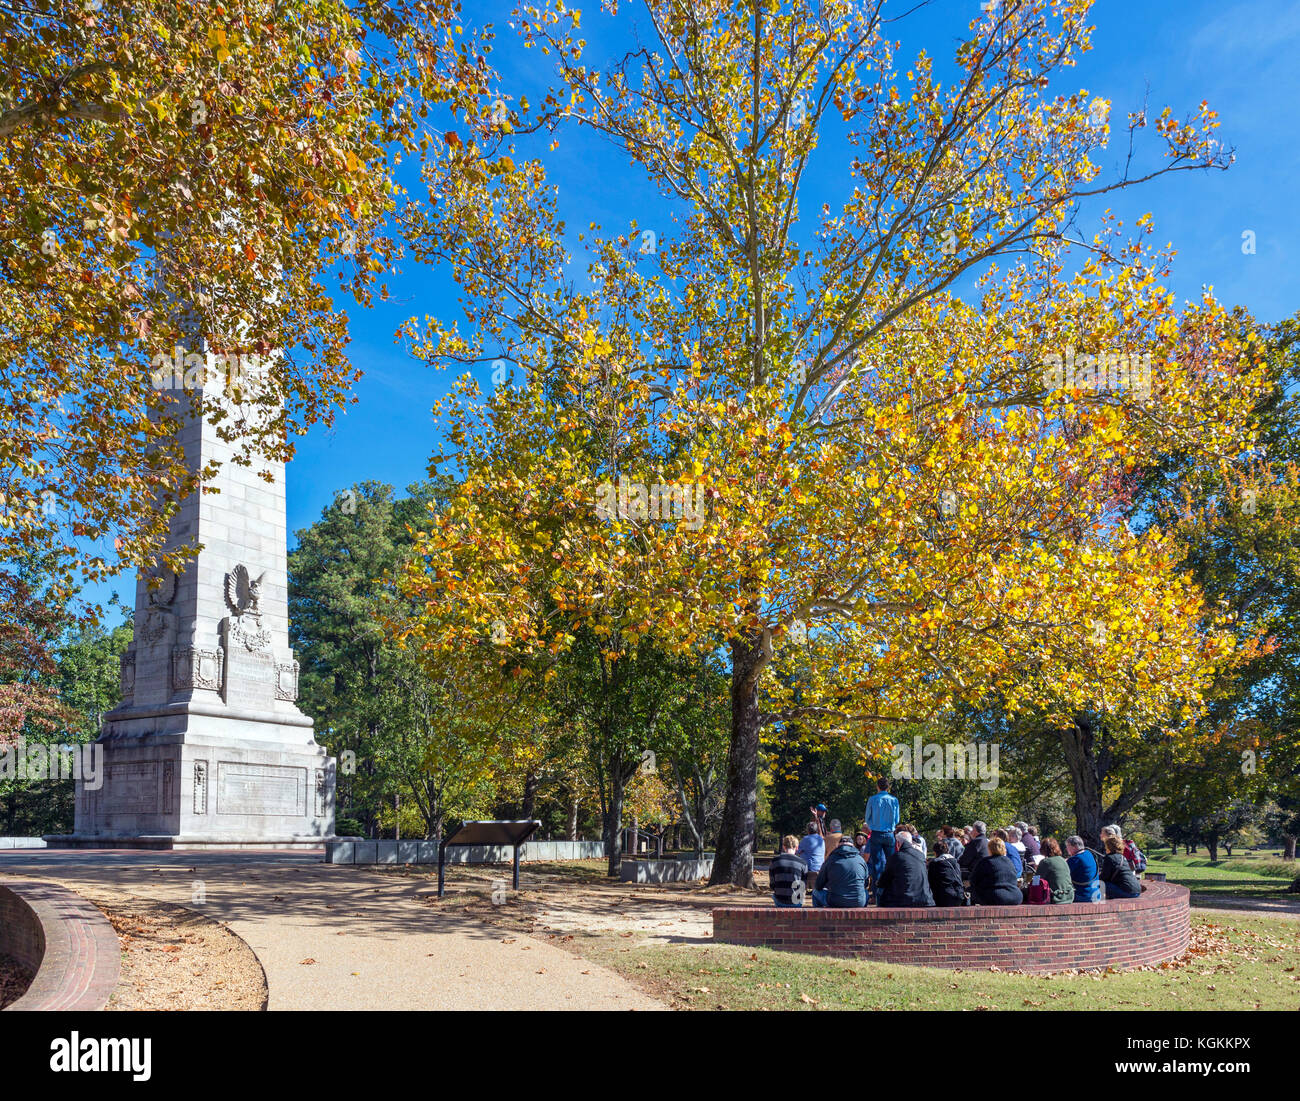 Visitors listening to a talk in front of the Tercentenary Monument, Jamestown, Virginia, USA. Stock Photo